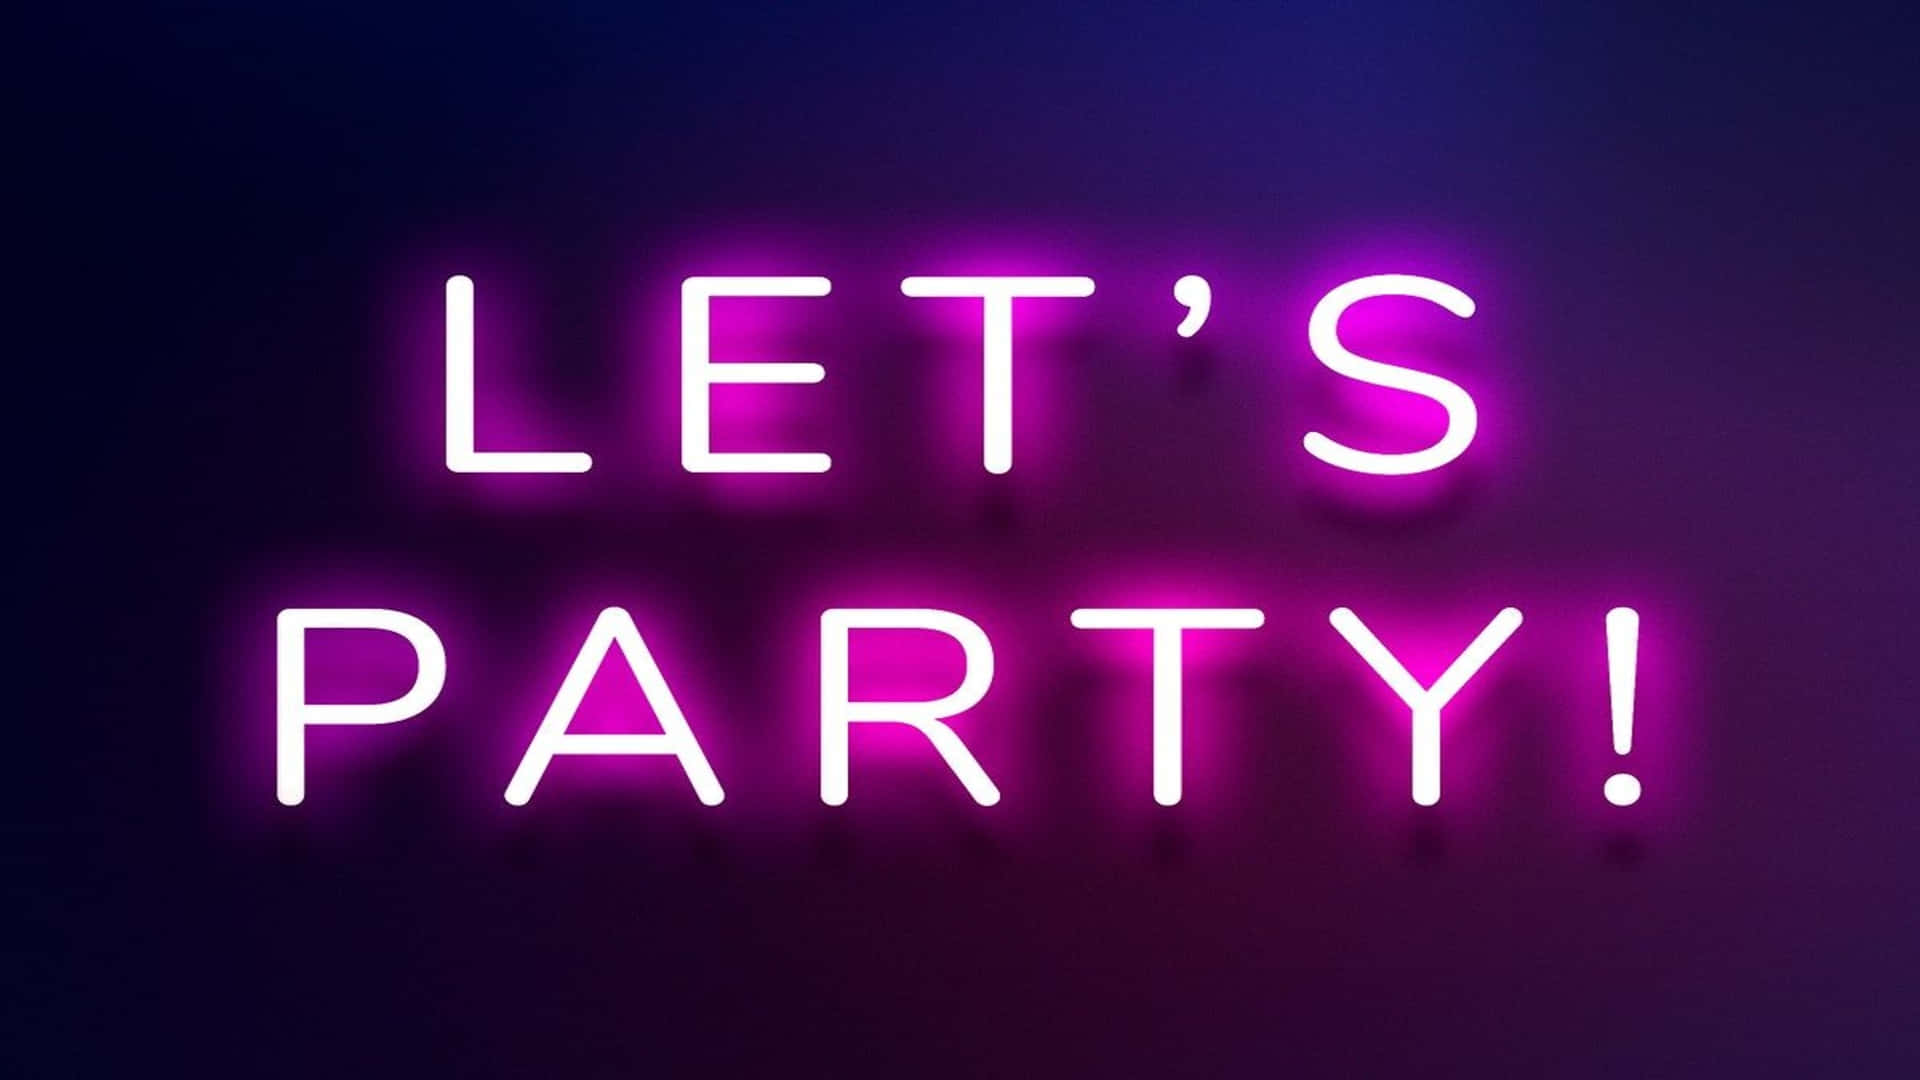 Let's Party Neon Sign On A Dark Background